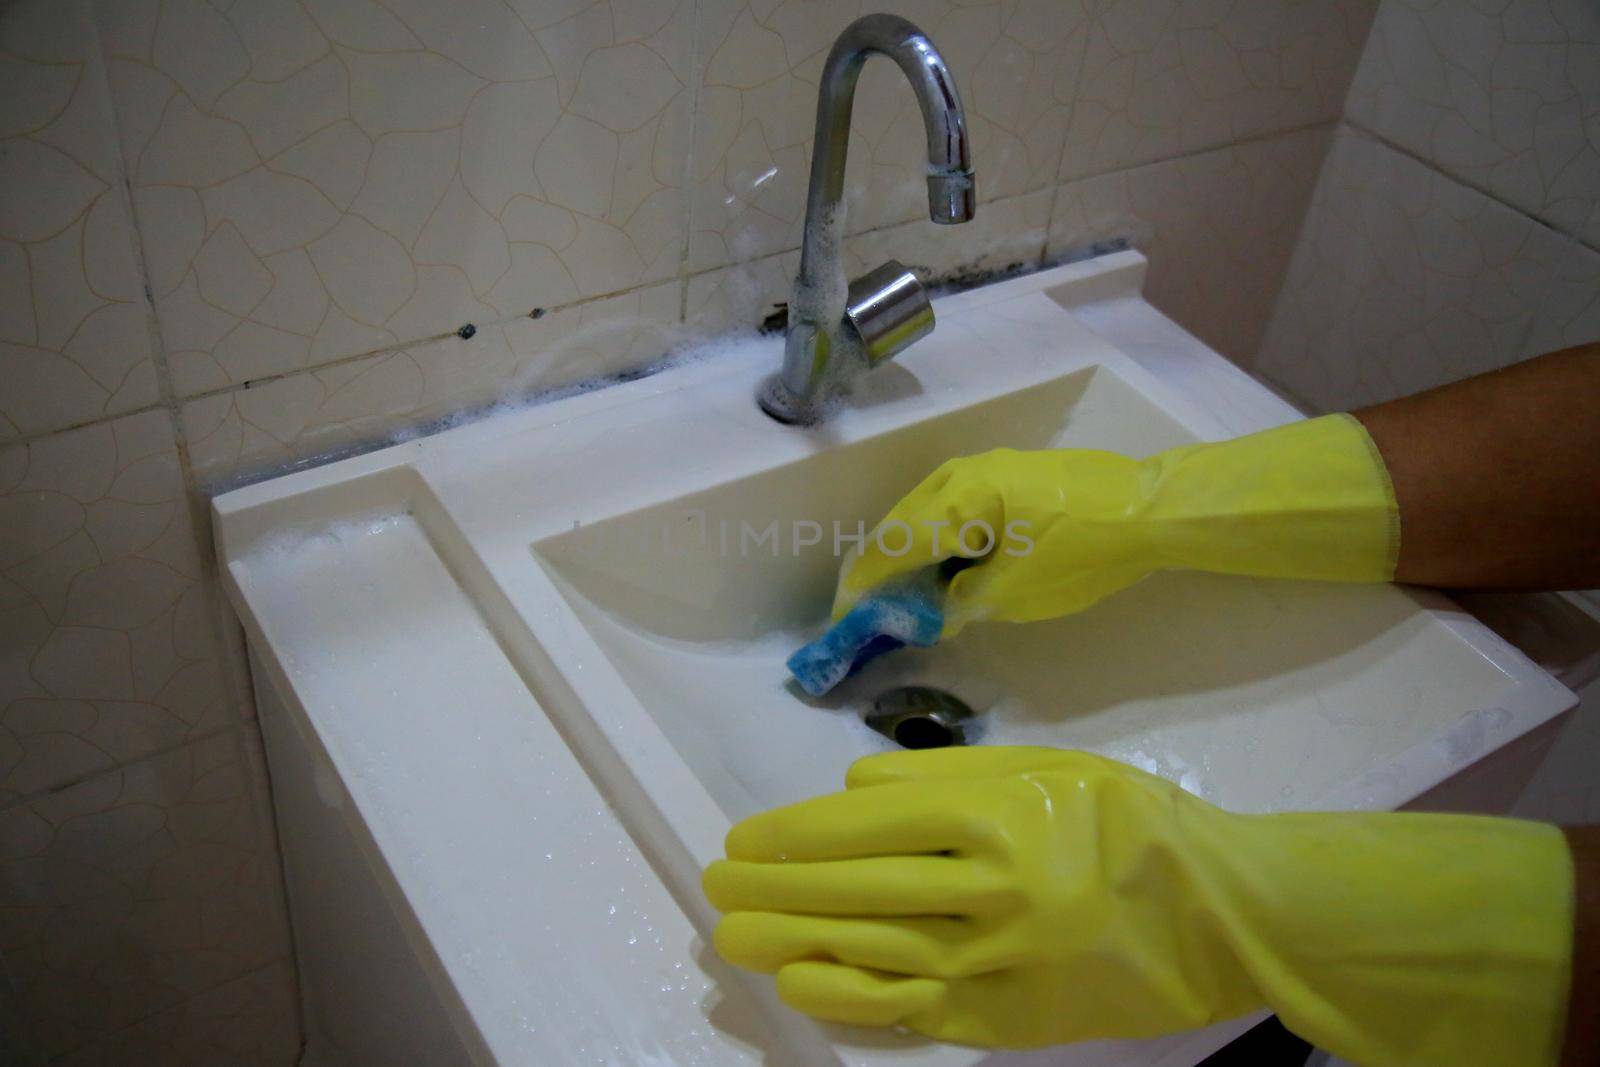 salvador, bahia, brazil - february 21, 2021: person wearing rubber glove during cleaning bathroom sink in a residence in the city of Salvador.